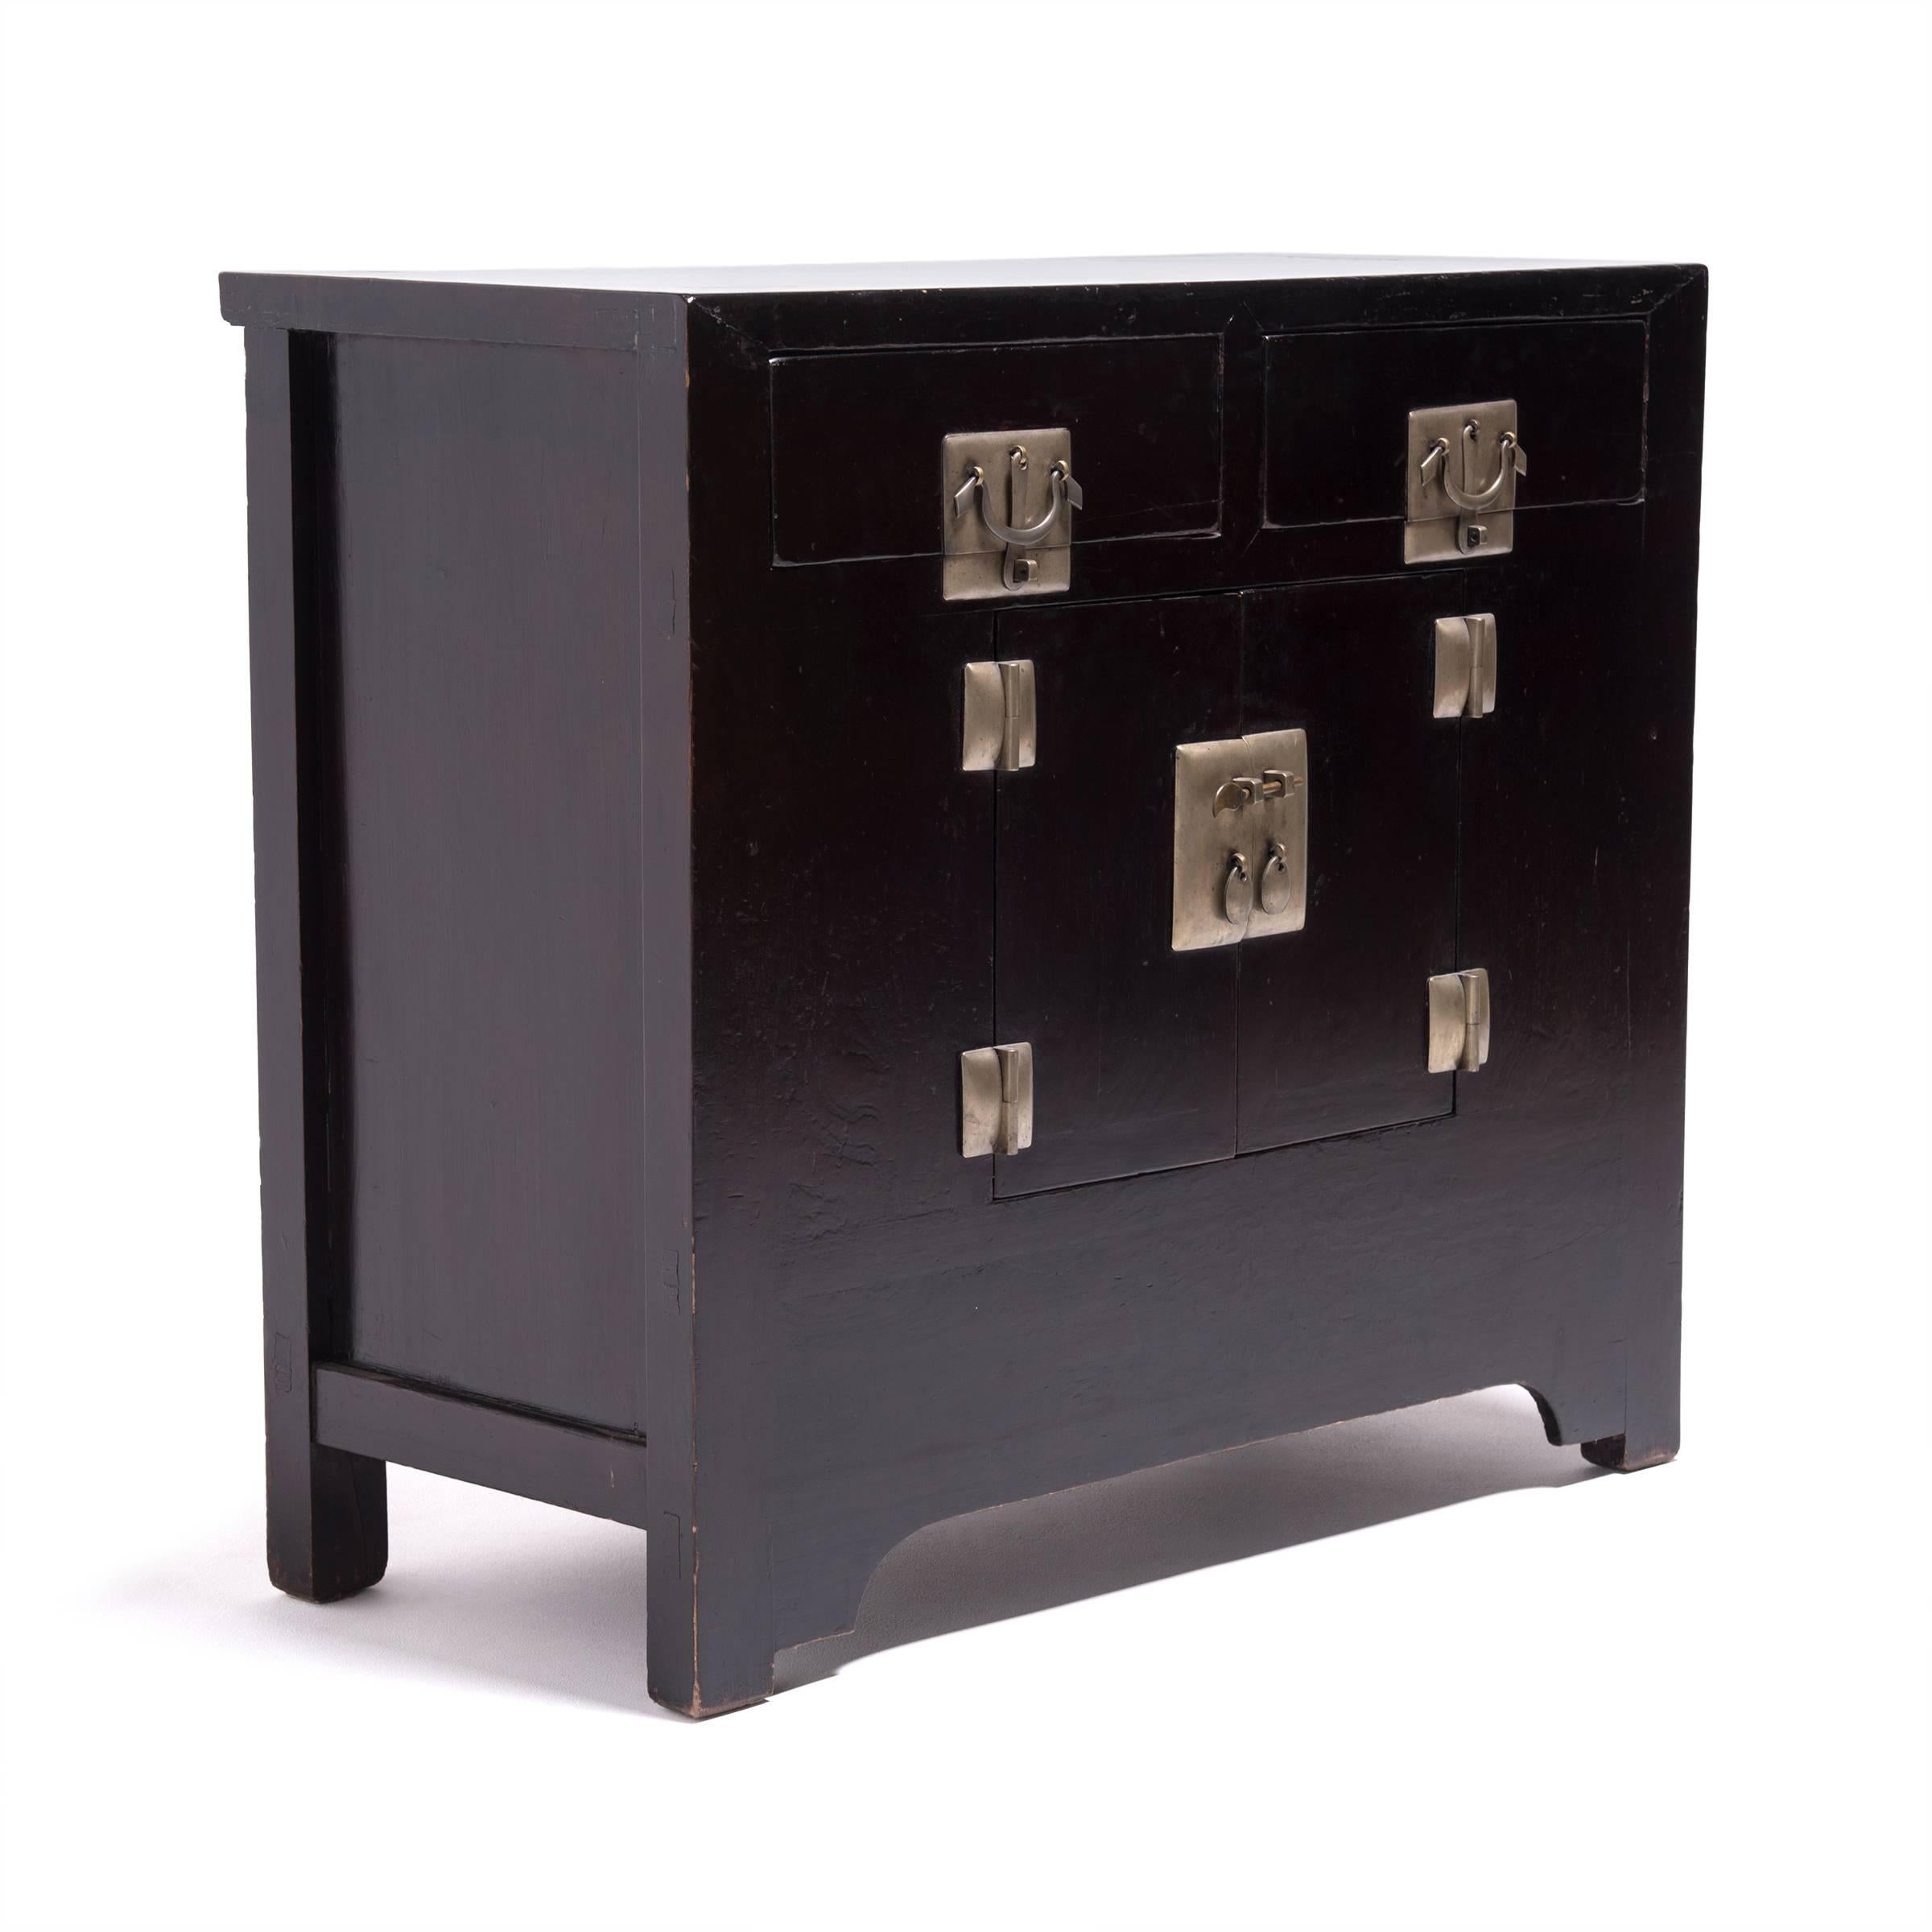 Made of northern elmwood, this stunning mid-19th century cabinet is distinguished by its beautifully aged lacquer finish and unique cushion hardware. To achieve its deep black color and lustrous sheen, artisans applied as many as 30 coats of lacquer